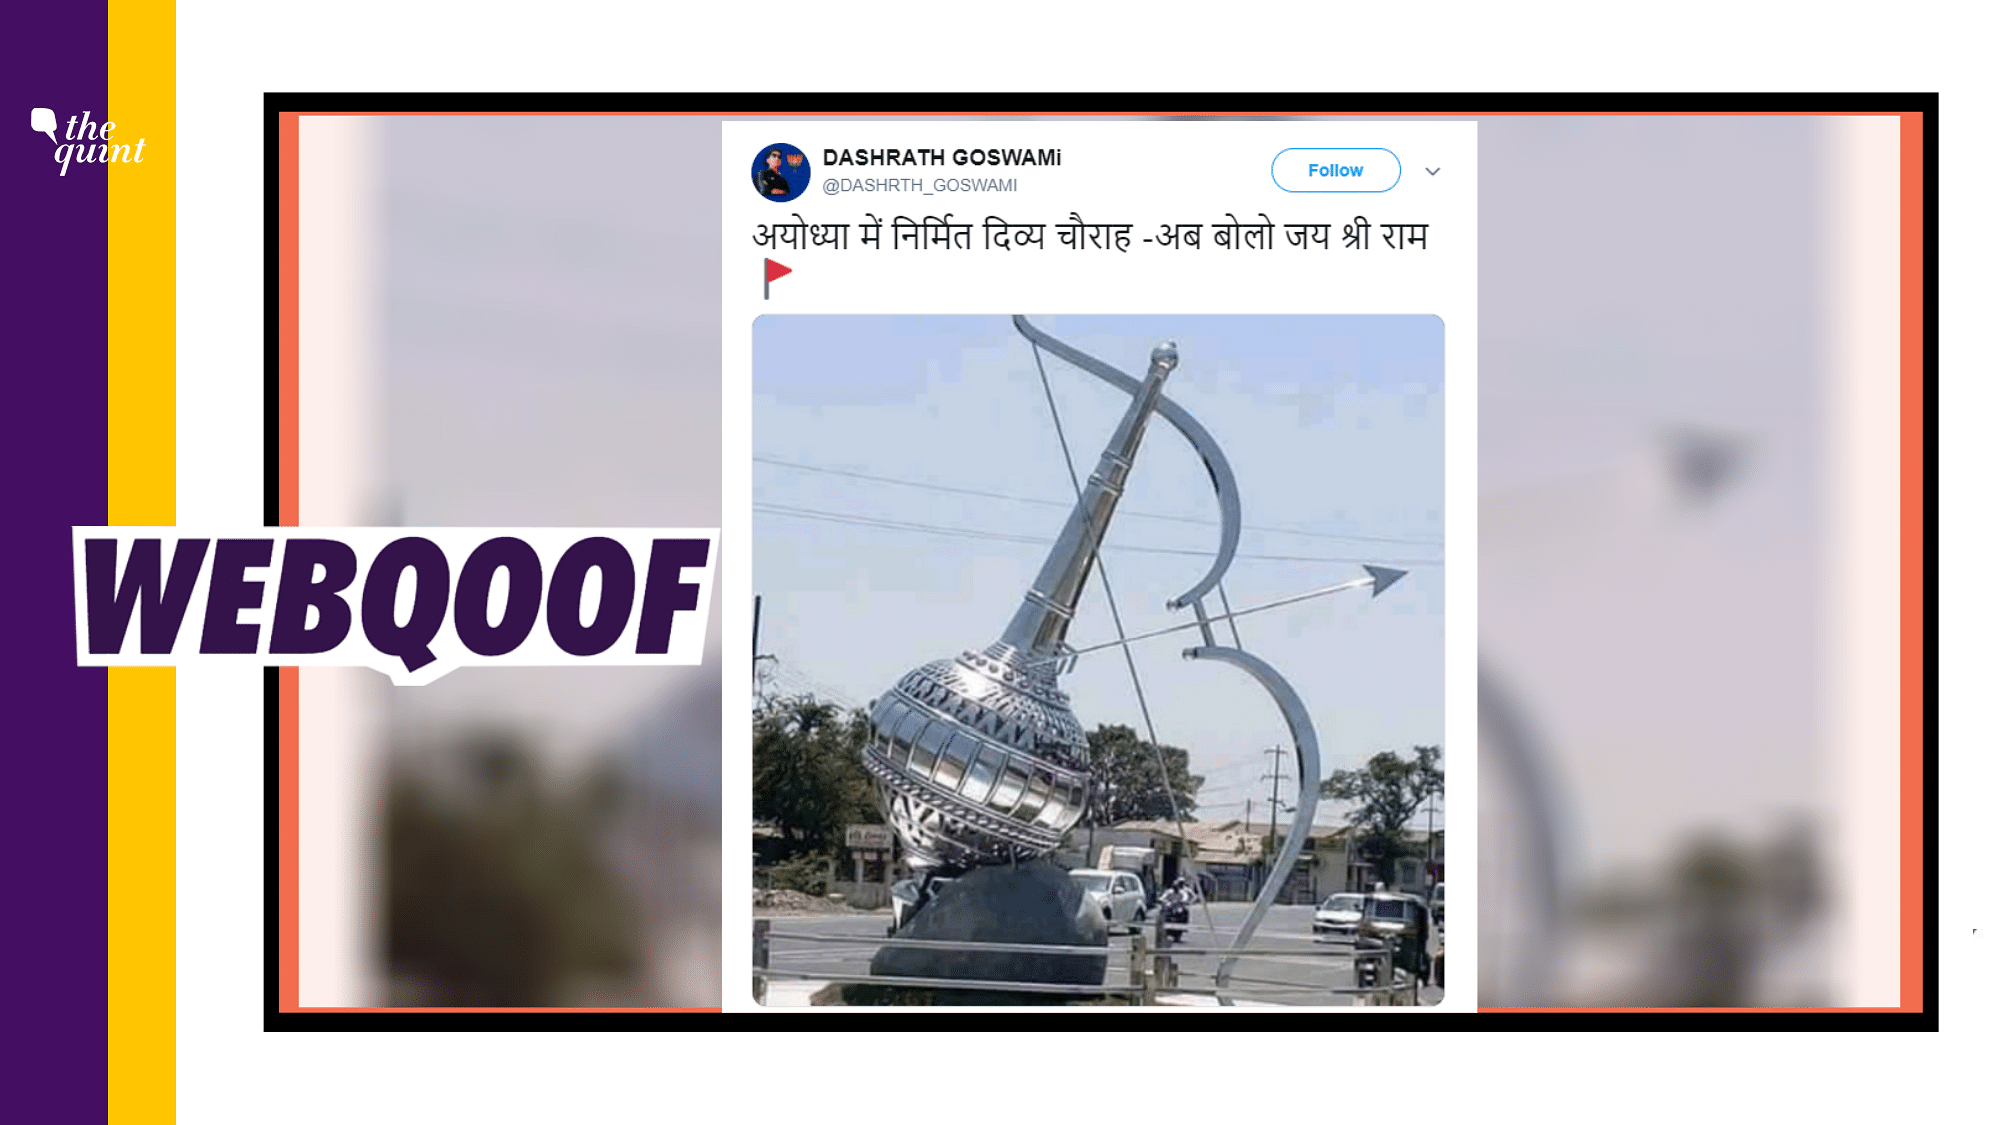 We found that the image is of a structure present at ‘Gada chowk’ in Vadodara, Gujarat.